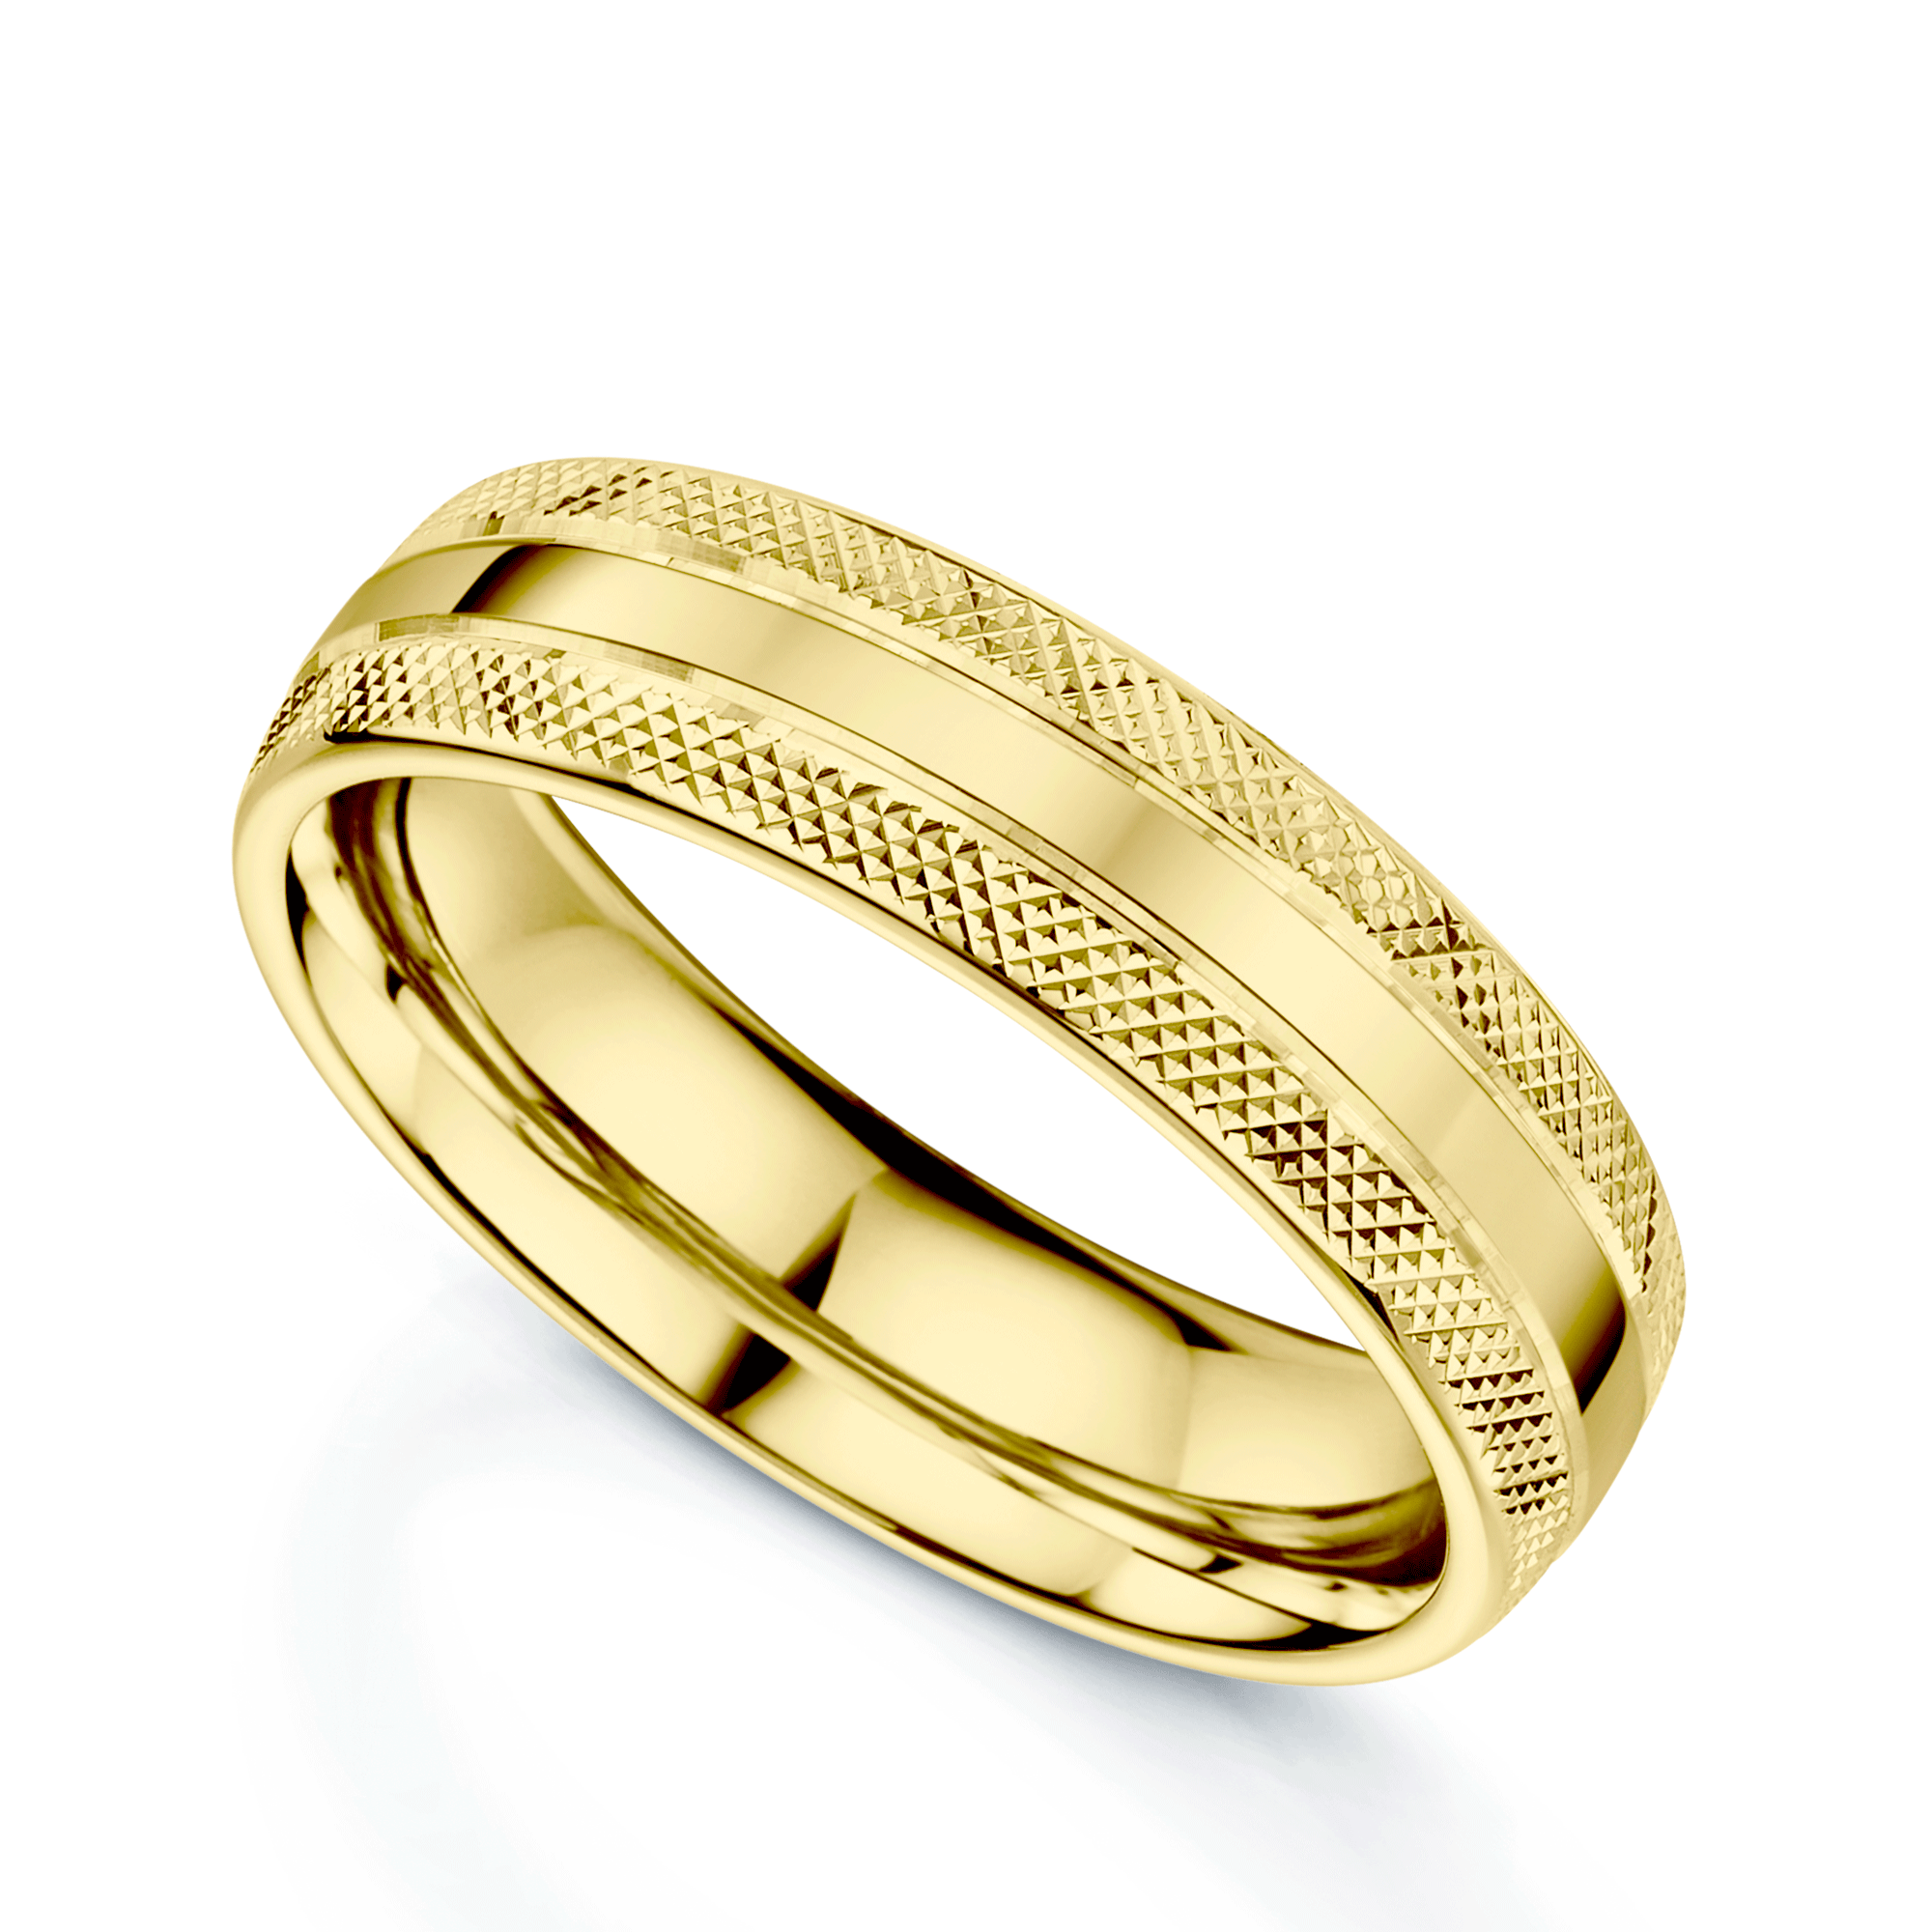 18ct Yellow Gold Polished Criss-Cross Patterned Edge Court Shape Wedding Ring